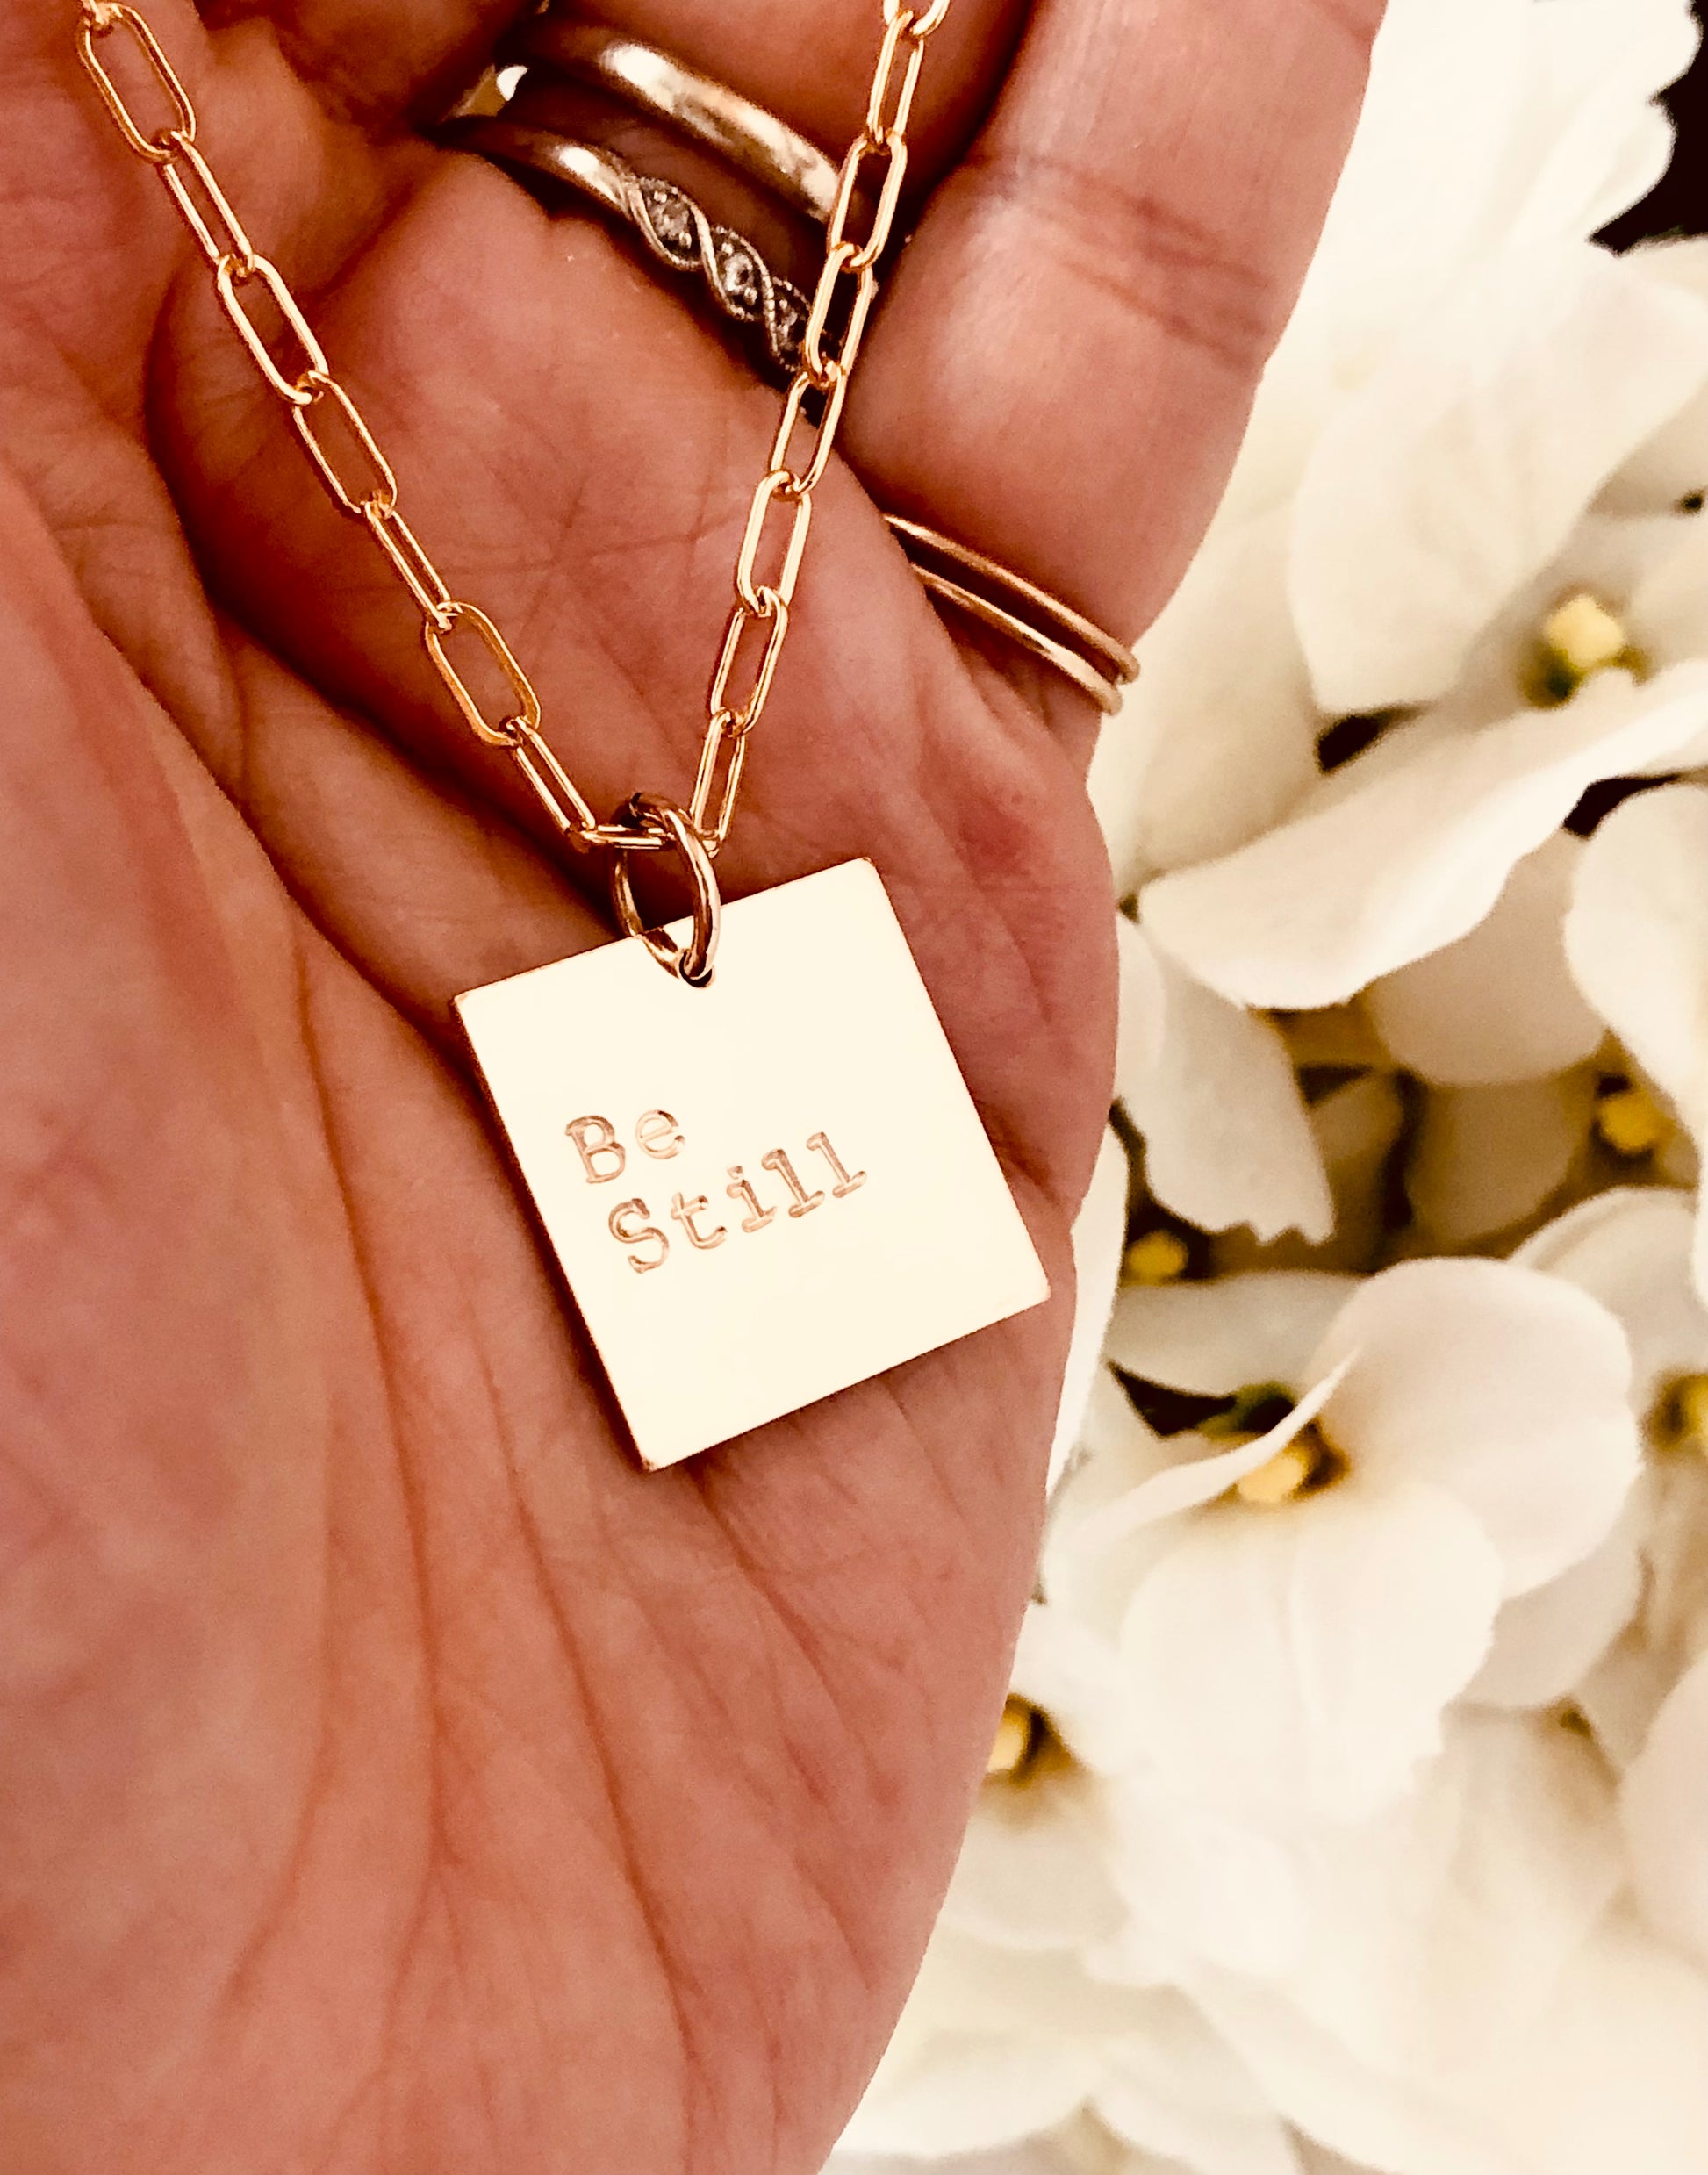 Square Plate Necklace, Personalized Necklace, Long Necklace, Hand Stamped Jewelry, Statement Necklace, Monogram and Name Jewelry, Office Outfit, Delicate Jewelry, Mothers Gift, Coco Wagner Jewelry, Gift For Her, Gift Ideas,  Birthday Gift, Mothers Gift, Christmas Gift Ideas, Mothers Day Gift  Minimalist Jewelry, Everyday Jewelry, Simple and Dainty